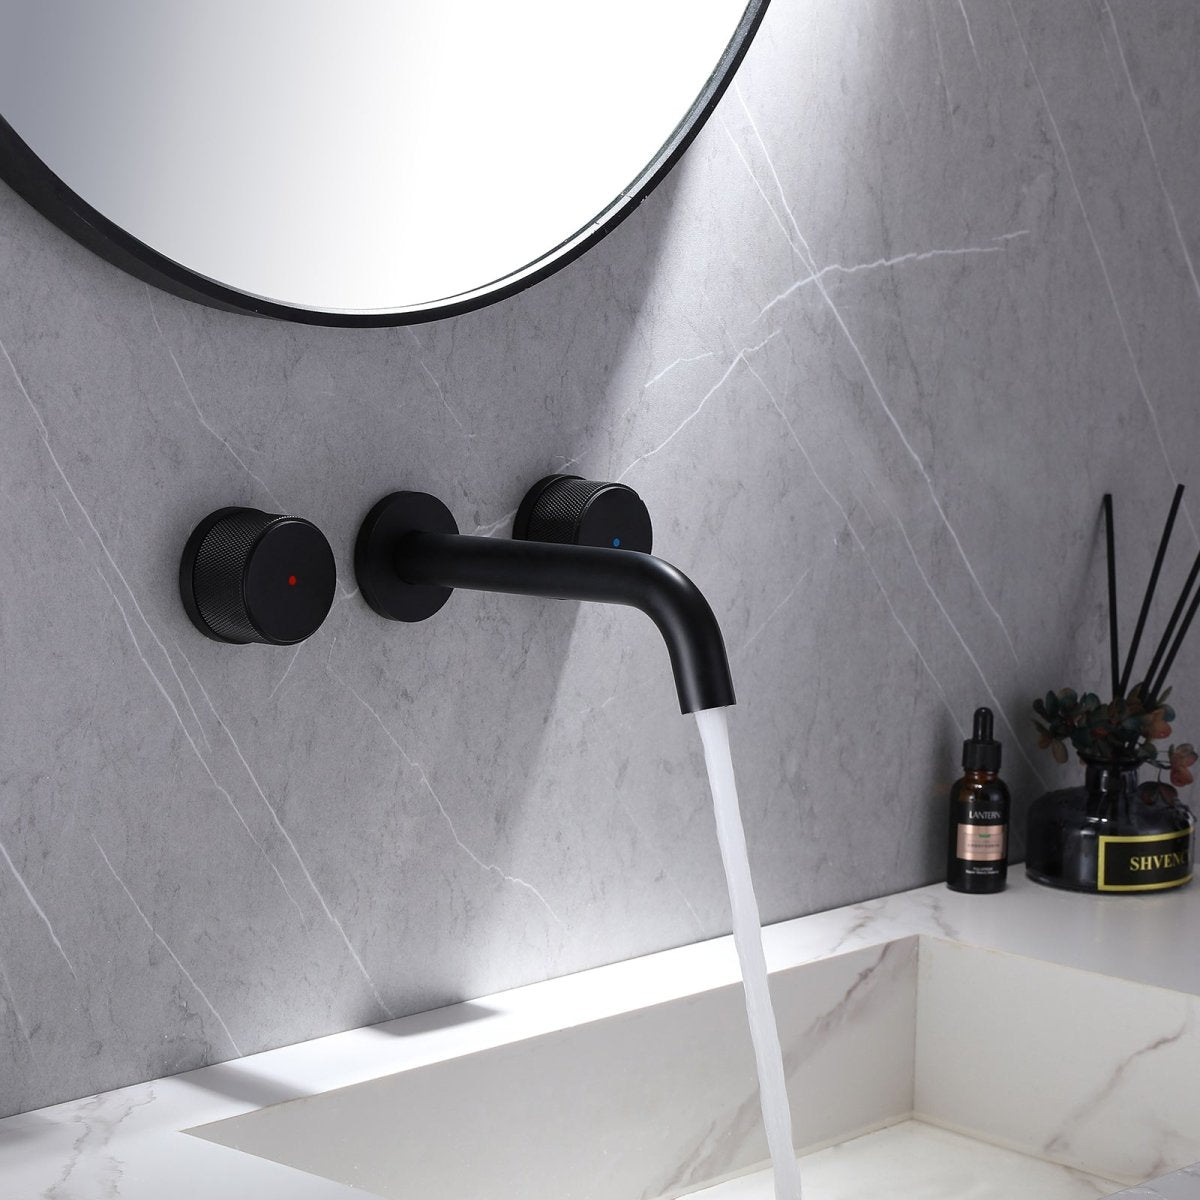 Wall Mounted Double Hole Two Handle Bathroom Faucet Black - buyfaucet.com